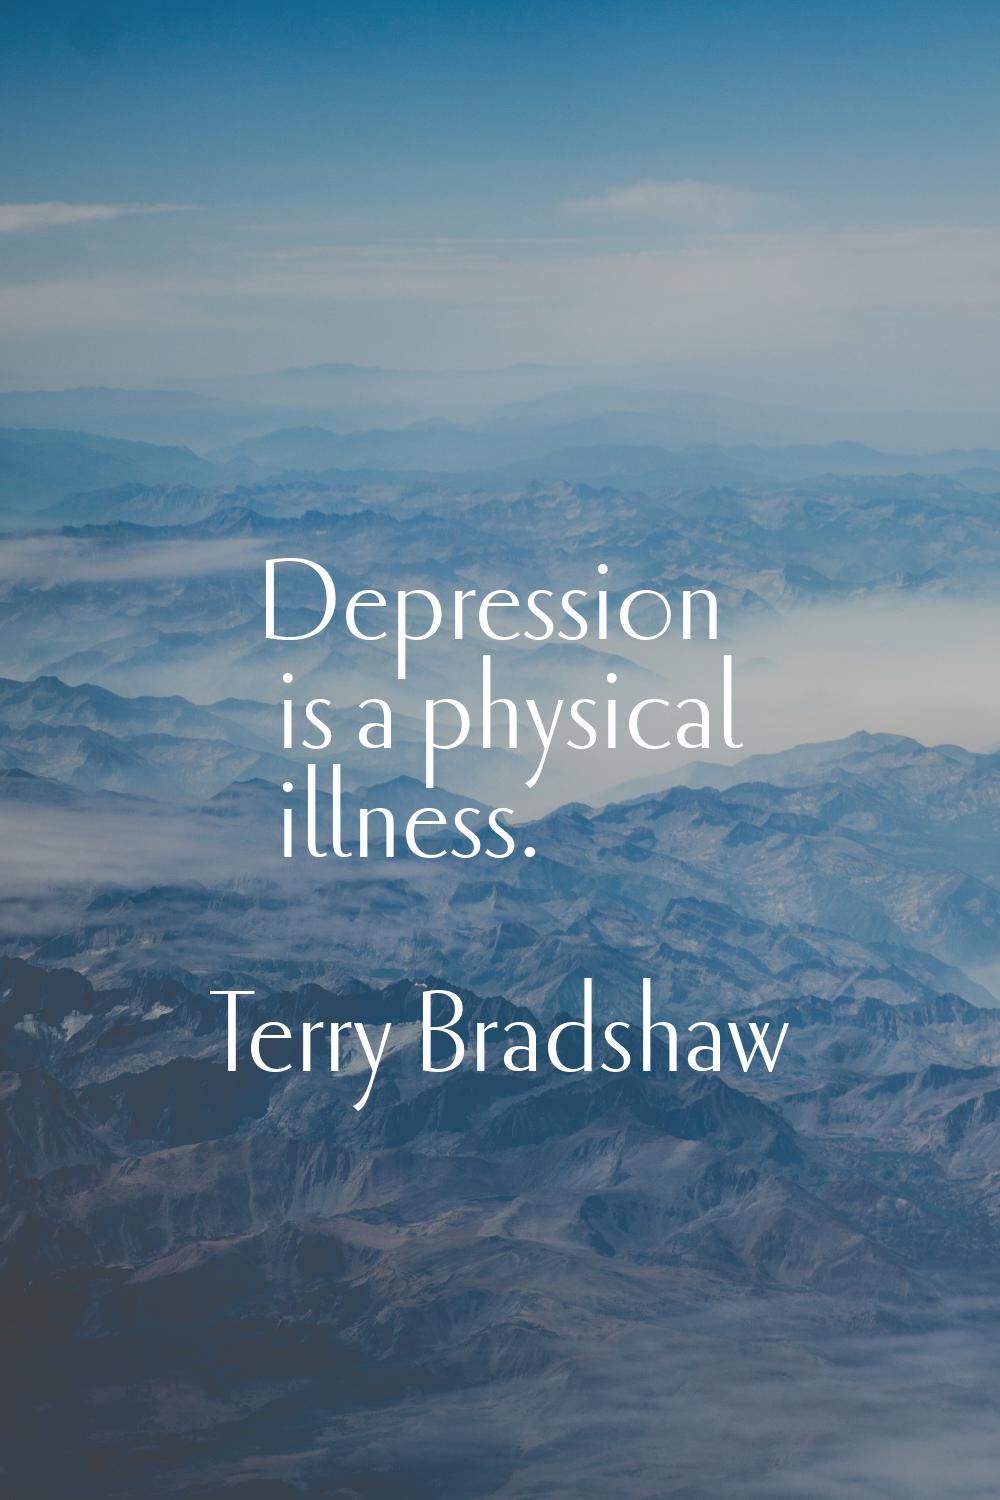 Depression is a physical illness.